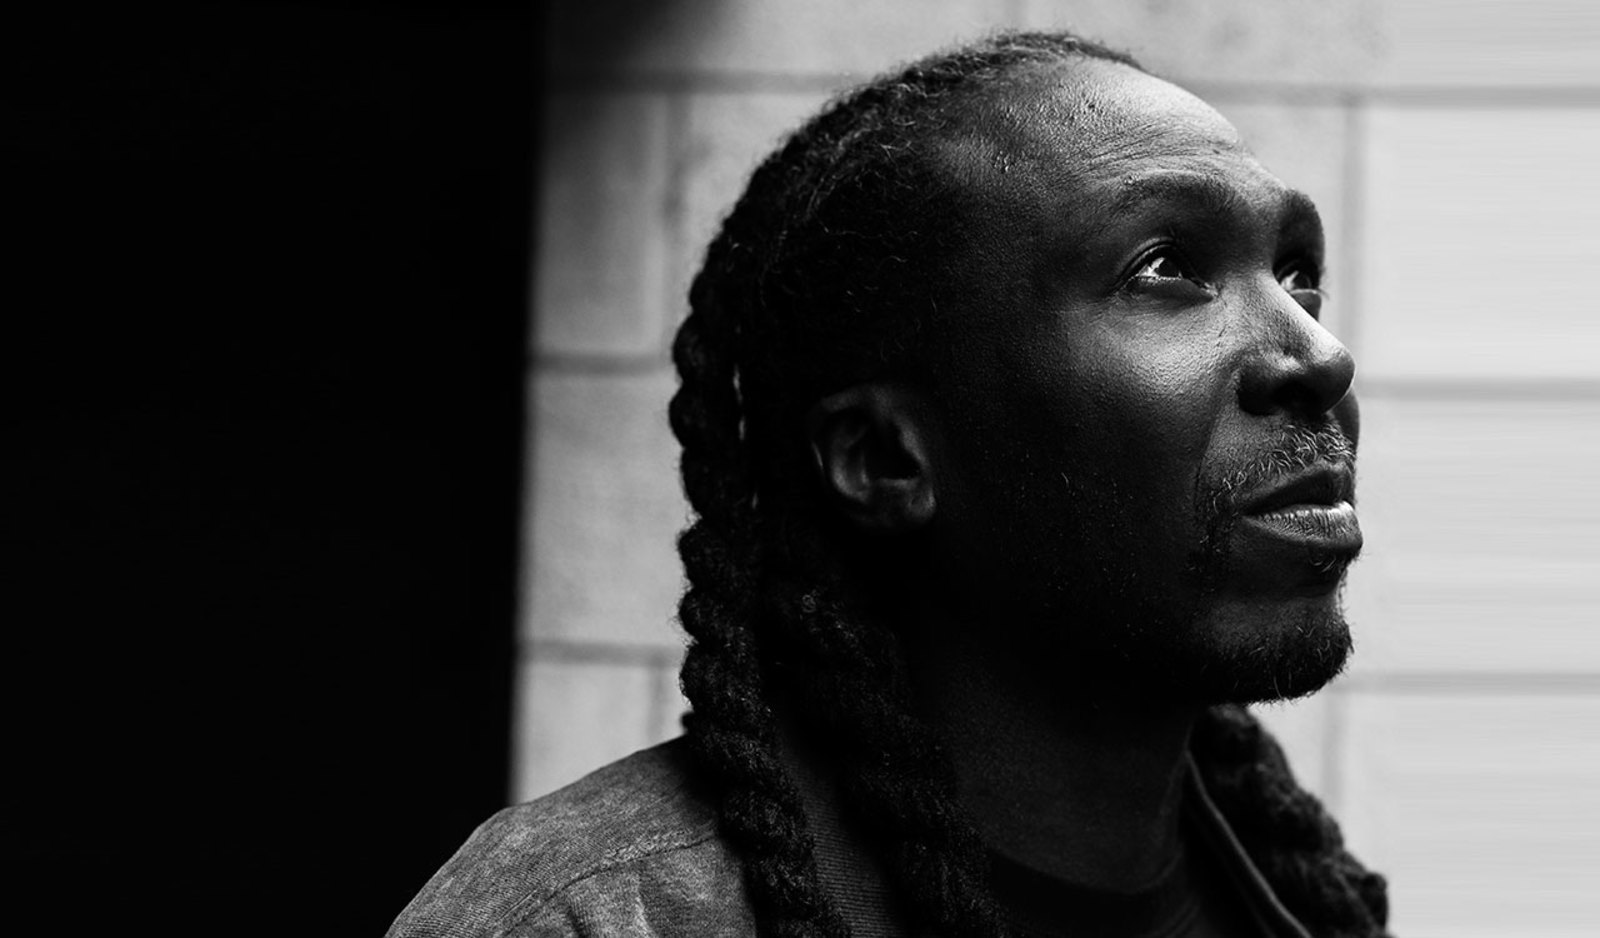 Watch FACT Magazine's 'Against The Clock' session with footwork originator RP Boo